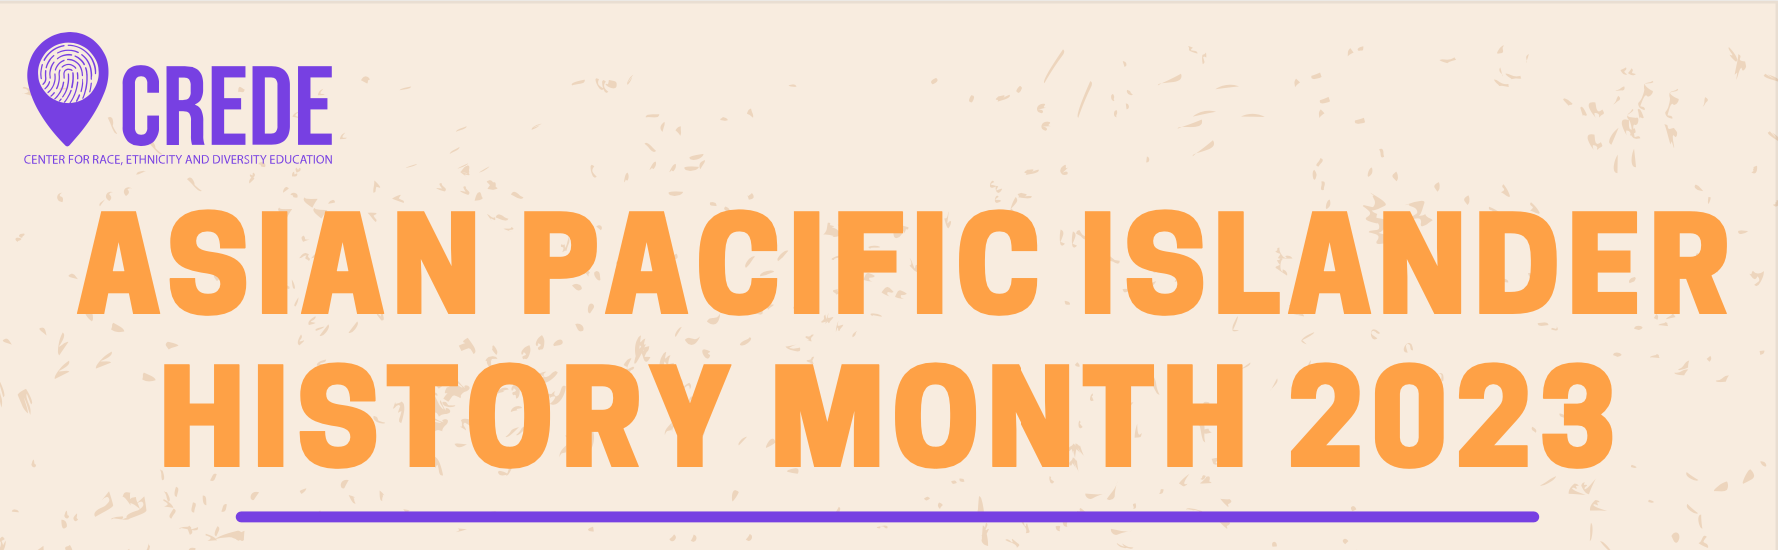 Asian Pacific Islander History Month 2023